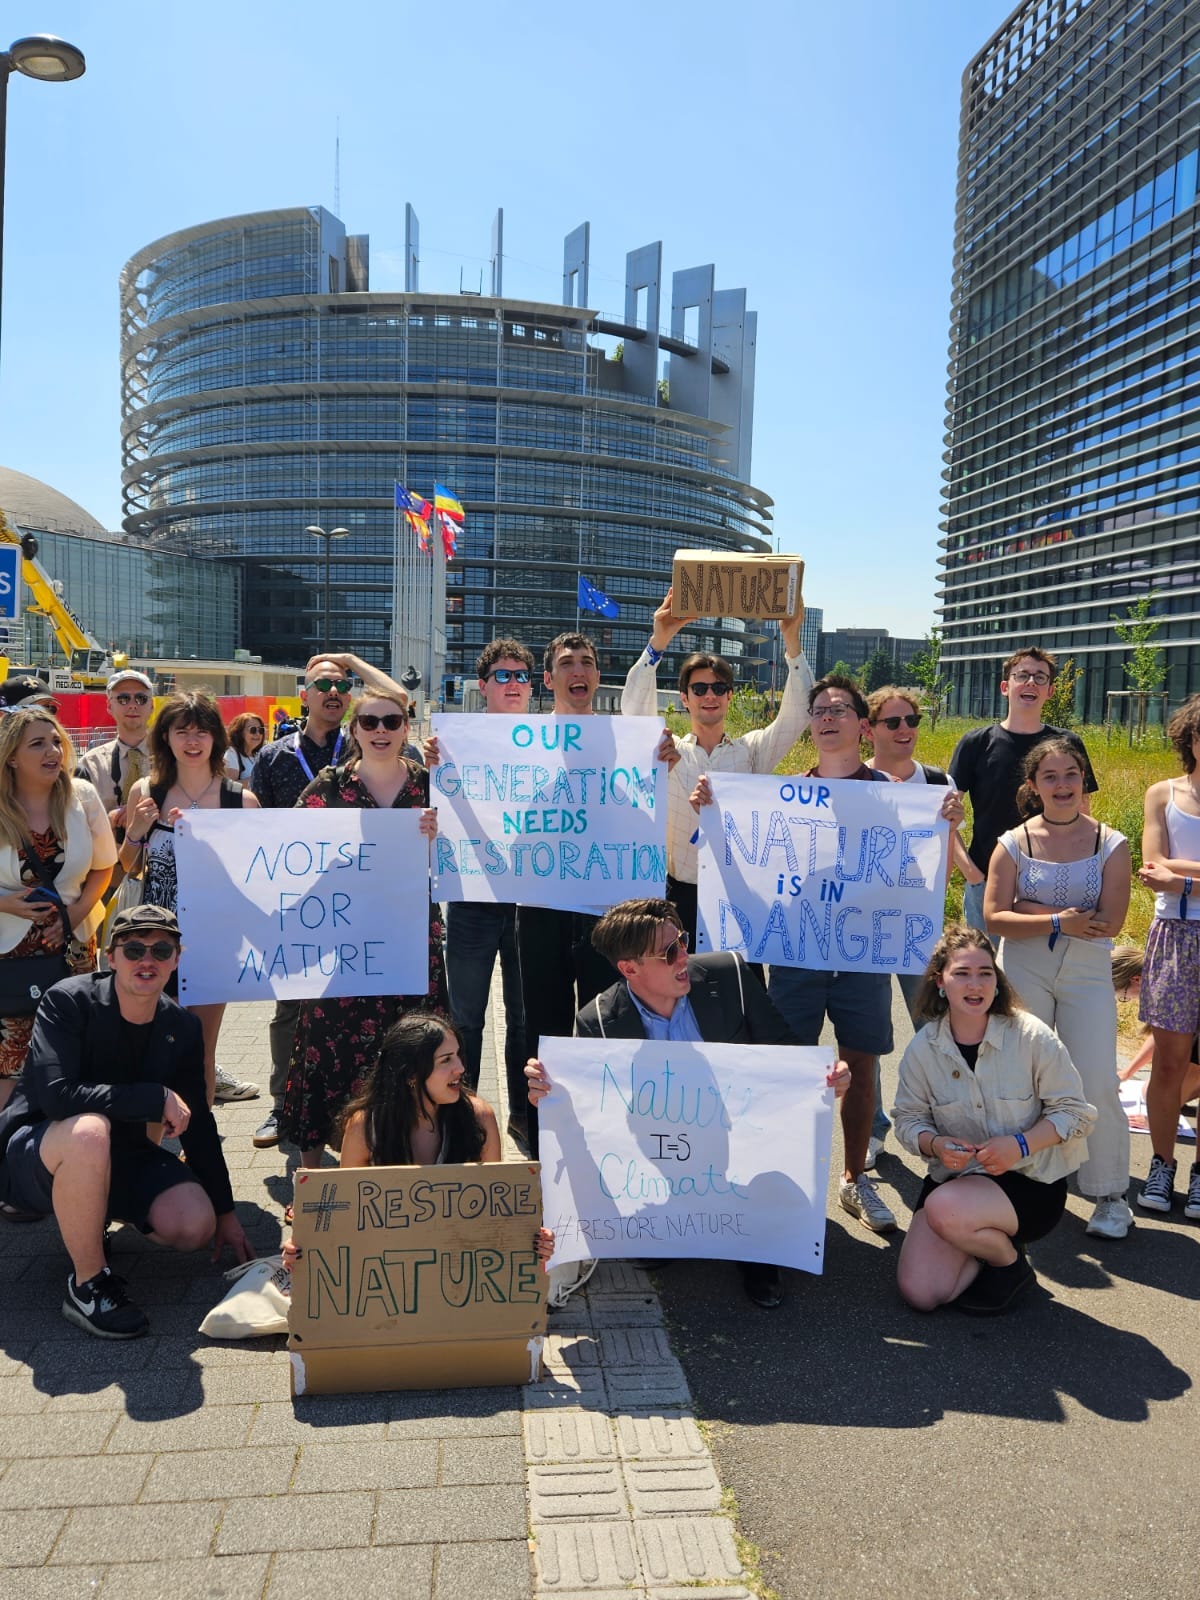 Group of around 20 youth activists hold signs that say 'noise for nature' and 'our nature is in danger' in front of the European Parliament in Strasbourg.